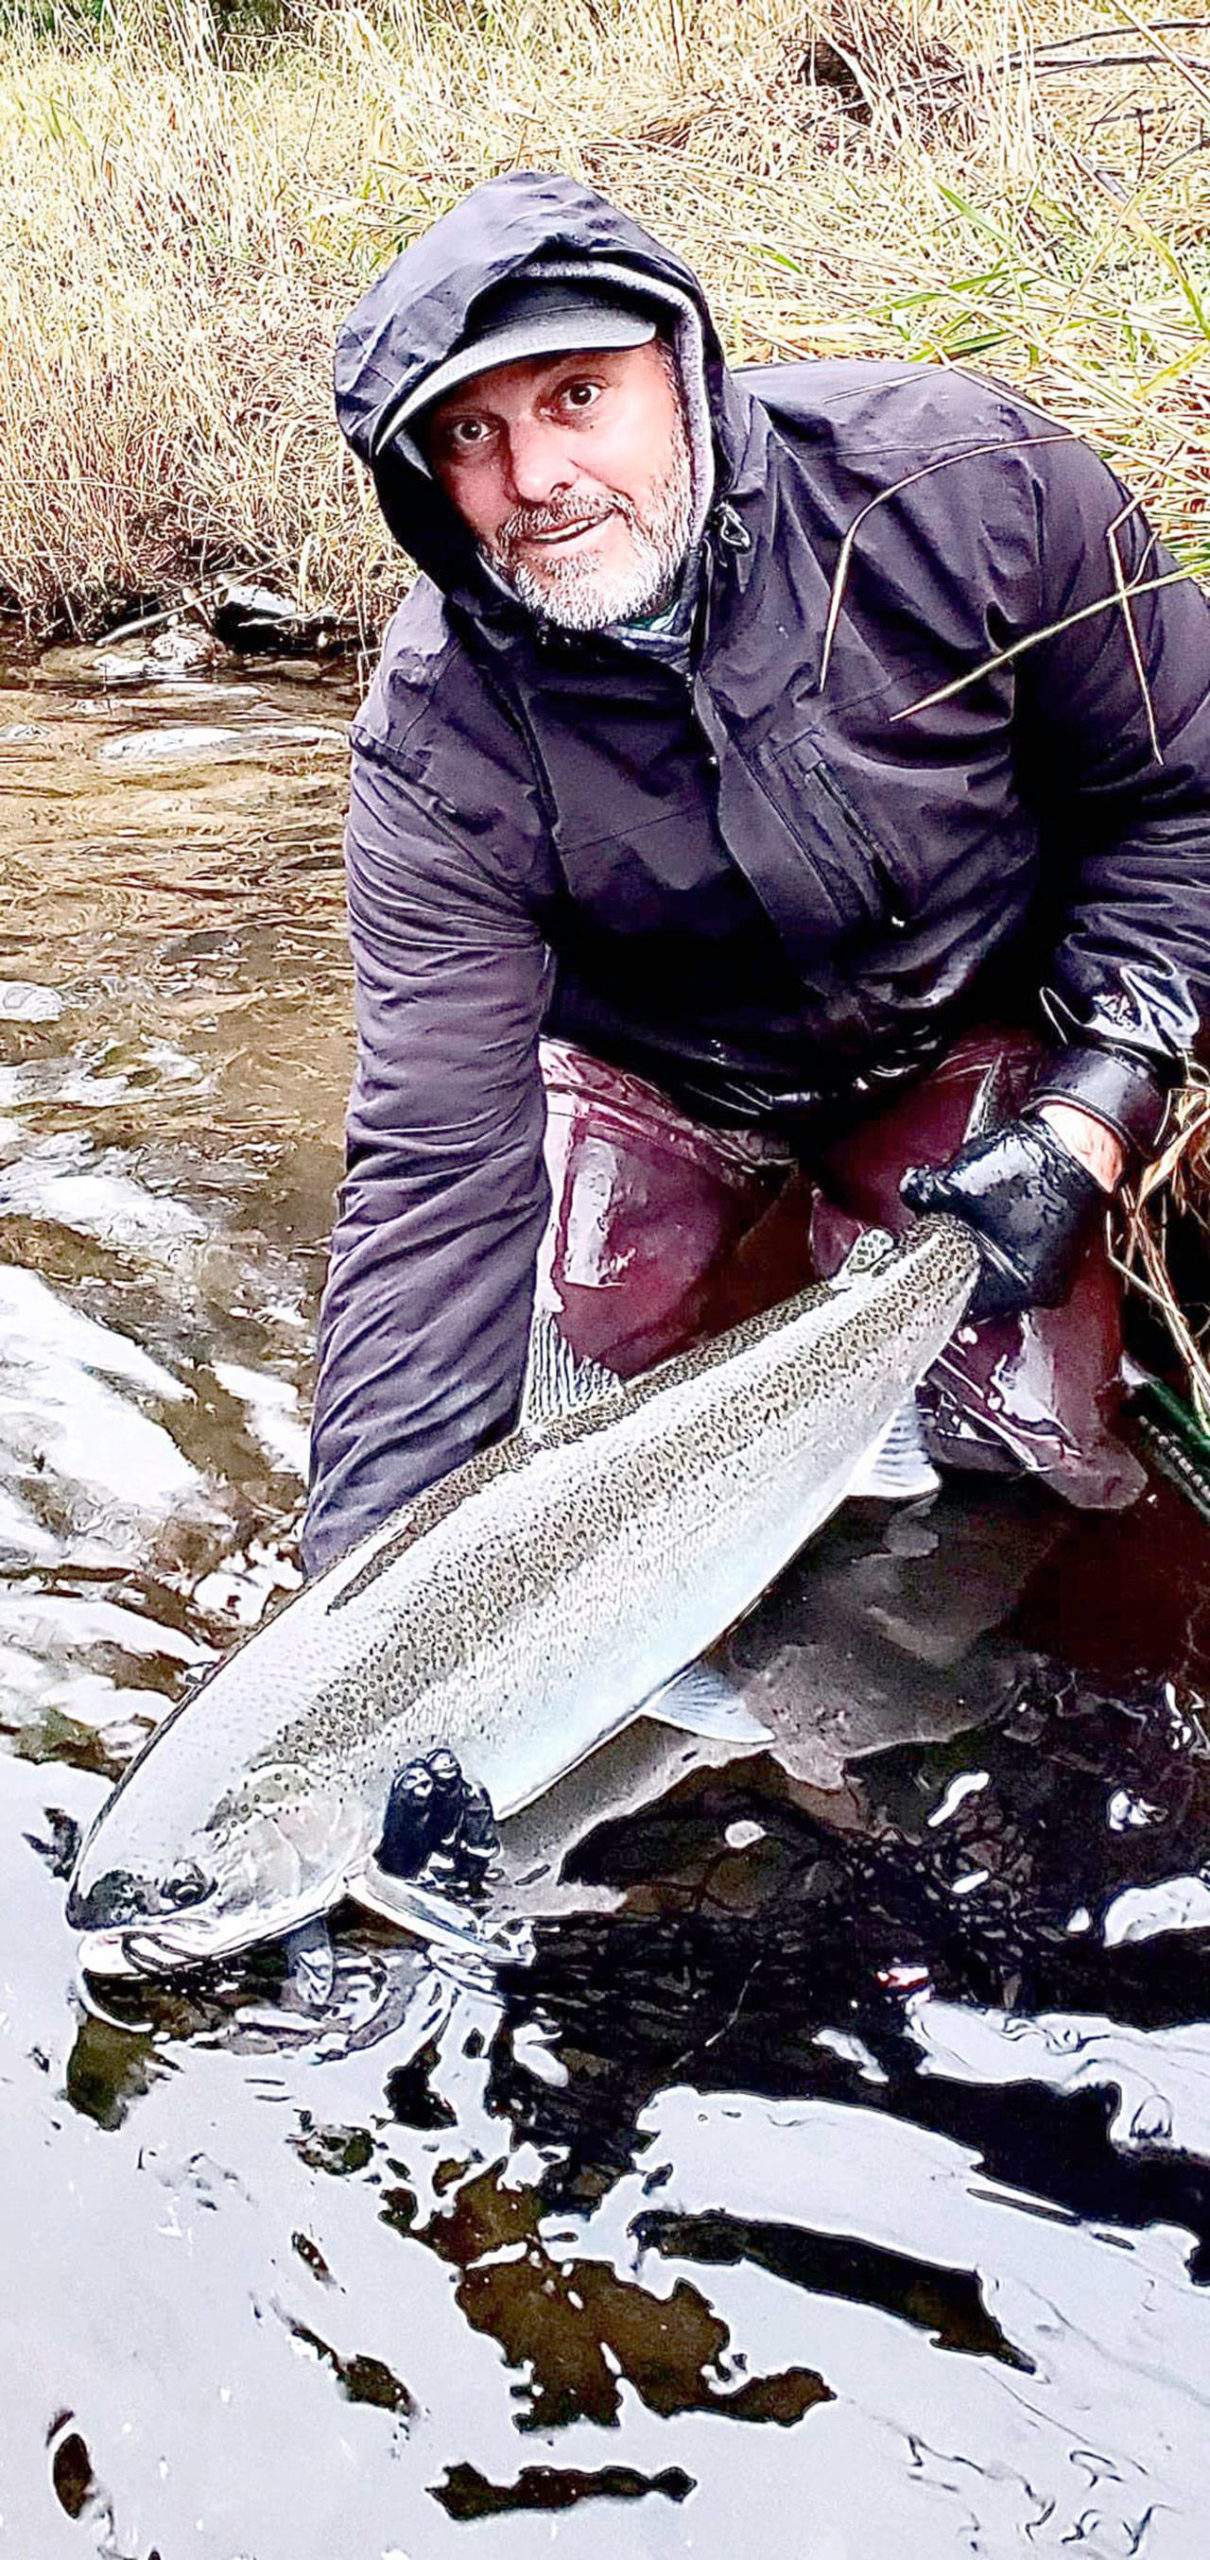 Jerry Wright of Jerry’s Bait and Tackle in Port Angeles caught and released this wild steelhead hen while fishing the Sol Duc River on Tuesday. Wright said it’s the earliest he’s ever caught a wild steelhead. (Courtesy photo)